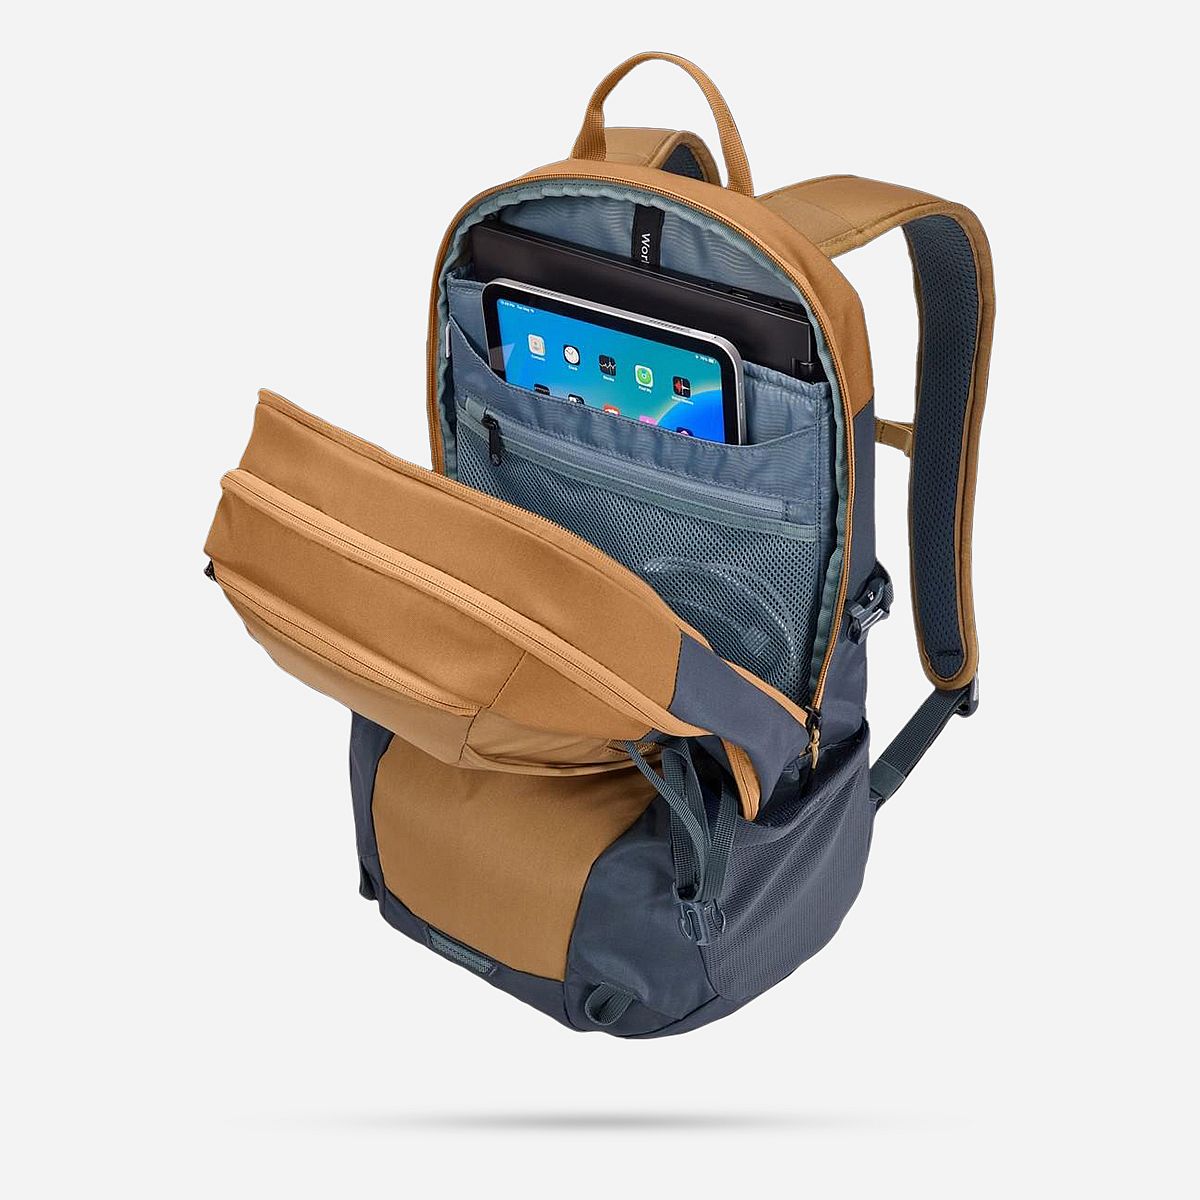 AN312702 EnRoute Backpack 23L